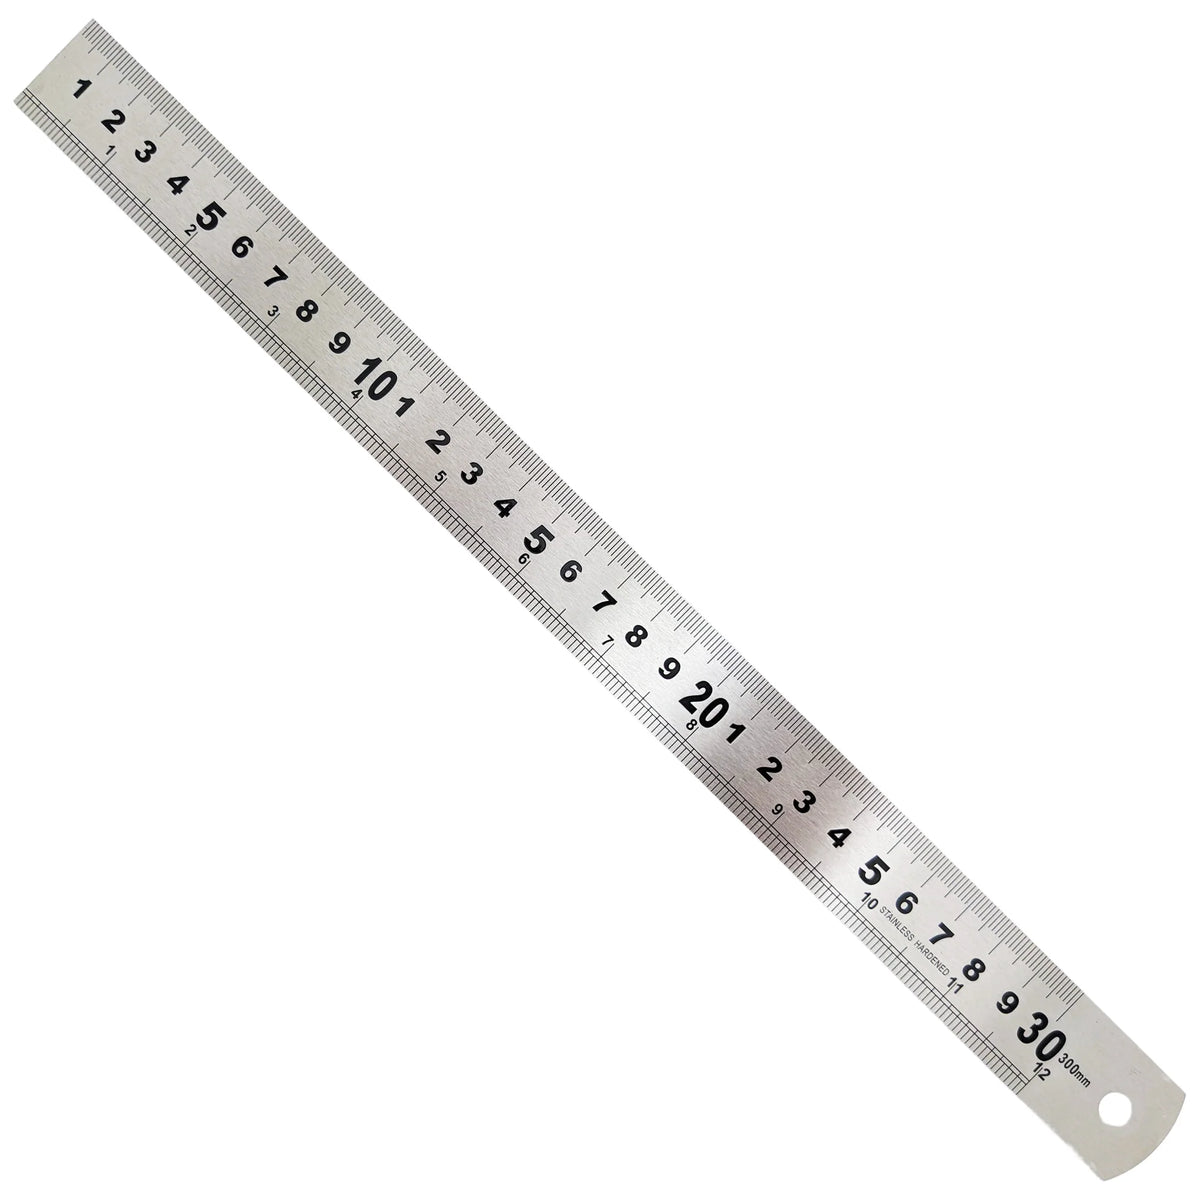 1 Pc Stainless Steel Metal Ruler Metric Rule Precision Double Sided  Measuring Tool 30cm Wholesale